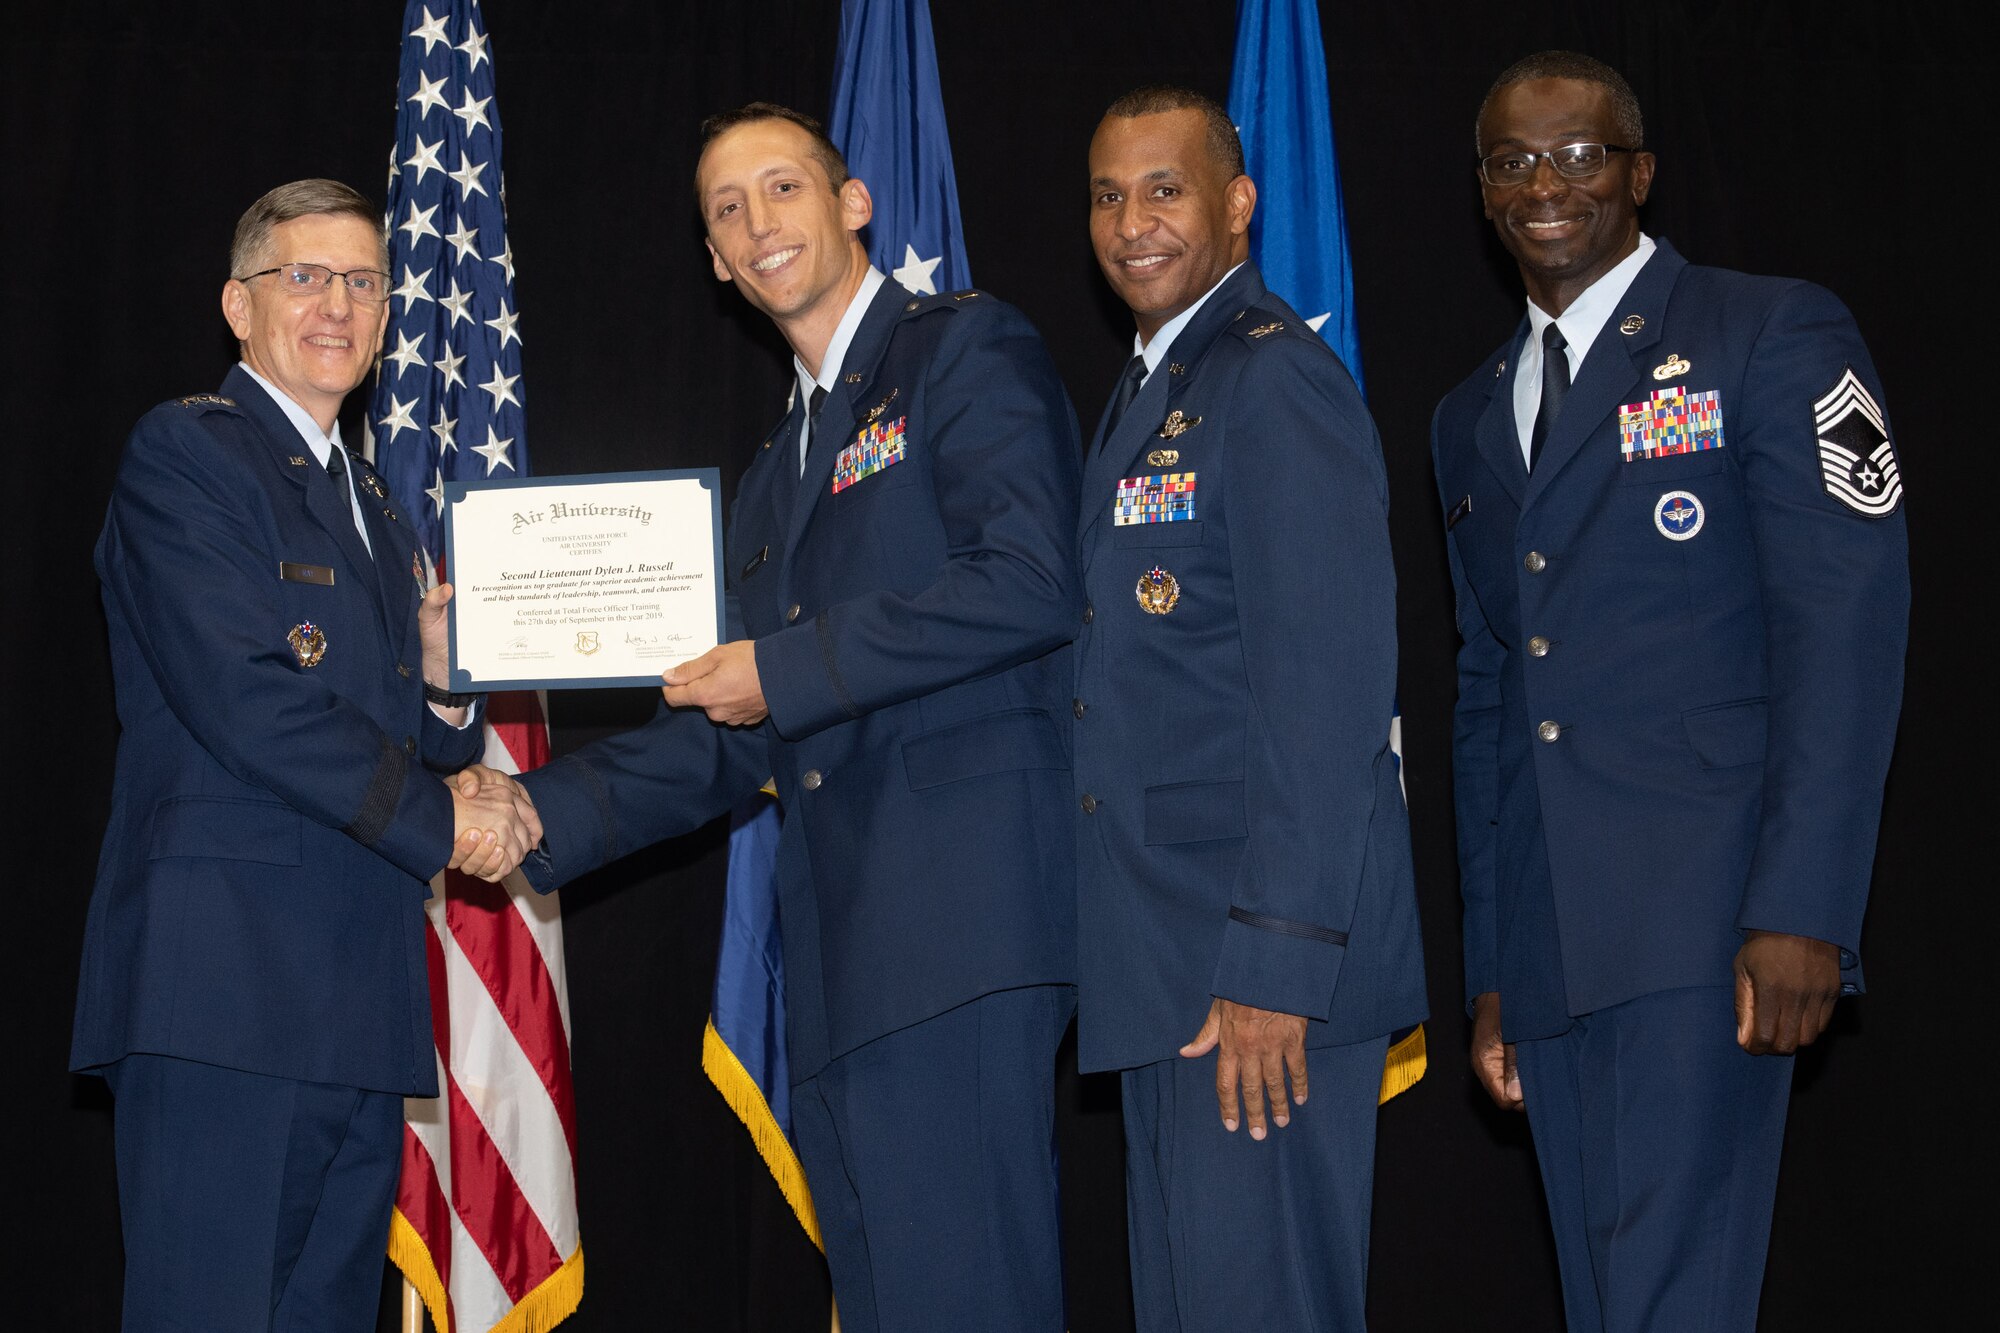 Gen. Tim Ray, Air Force Global Strike Command commander, presents the top graduate award for the 24th Training Squadron to 2nd Lt. Dylan Russel from Air University’s Officer Training School “Godzilla” class 19-07 during an awards ceremony at the Alabama State University Acadome, Montgomery, Ala., Sept. 26, 2019. Class 19-07, dubbed internally as “Godzilla,” started with more than 800 officer trainees, effectively double the average class size.